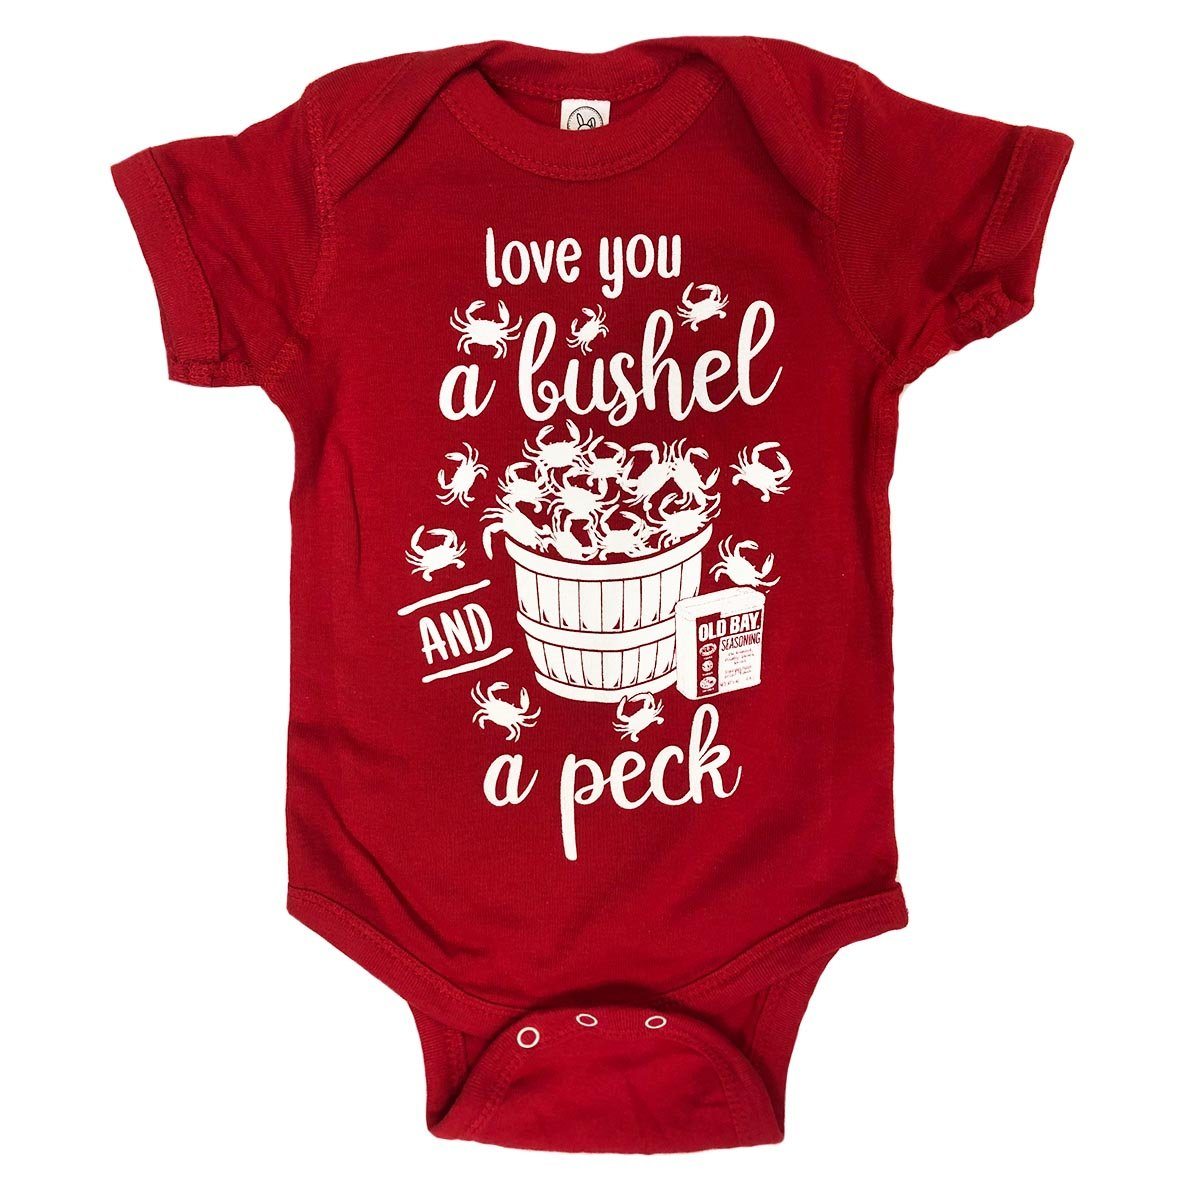 Love You A Bushel & A Peck (Red) / Baby Onesie - Route One Apparel